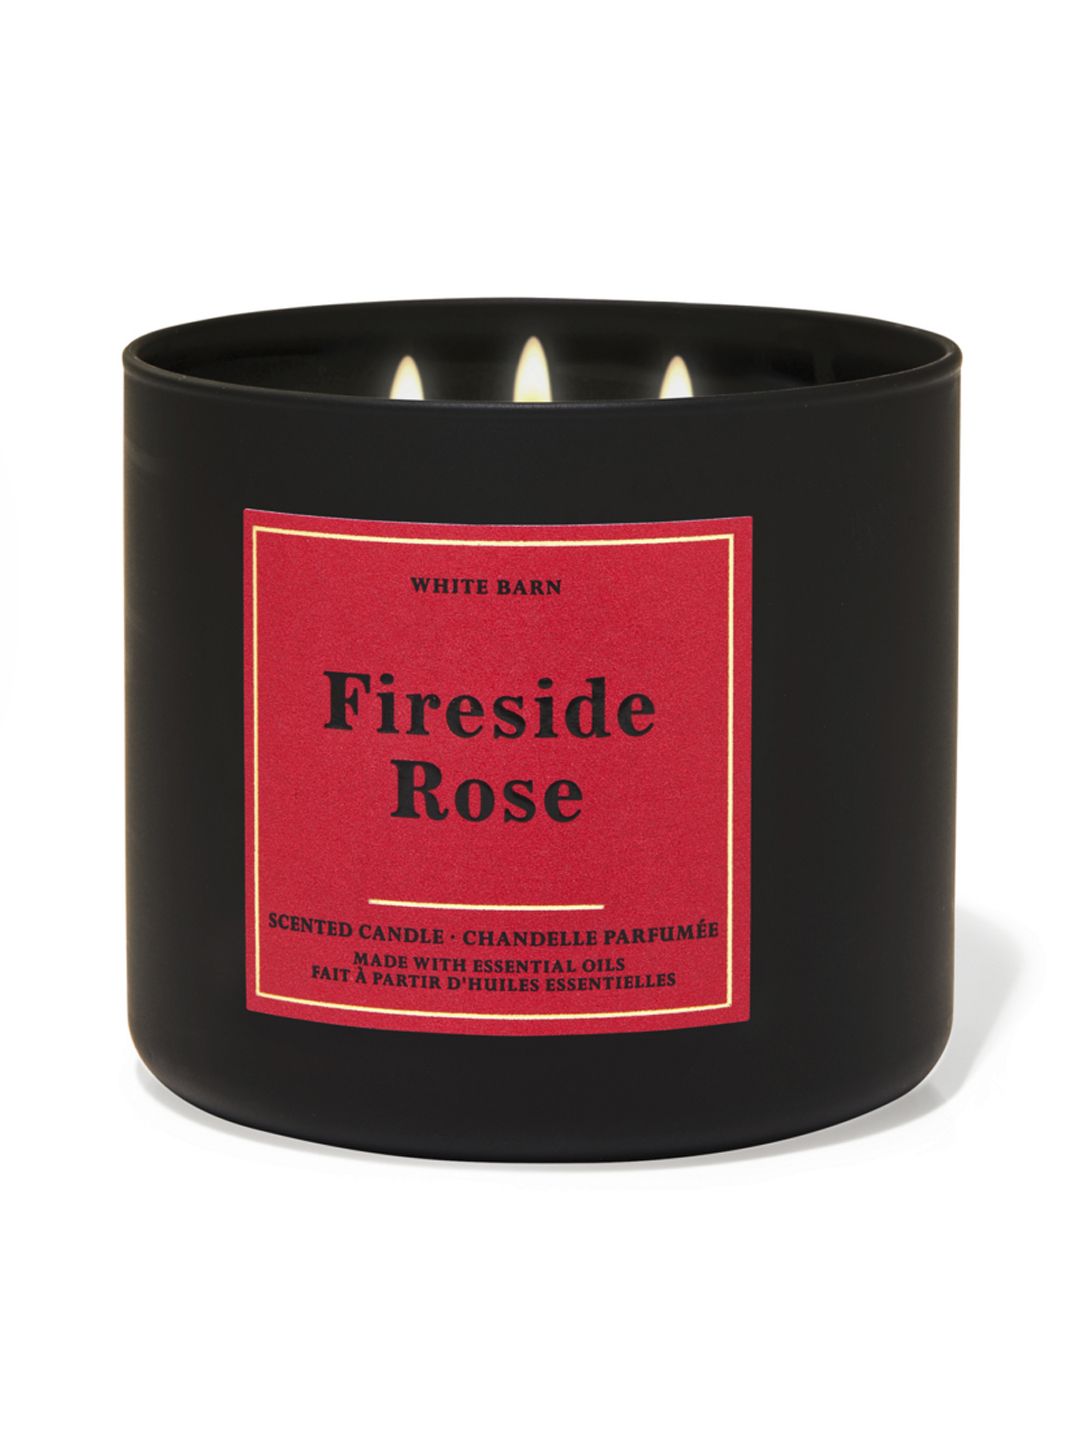 Bath & Body Works Fireside Rose 3-Wick Scented Candle - 411g Price in India